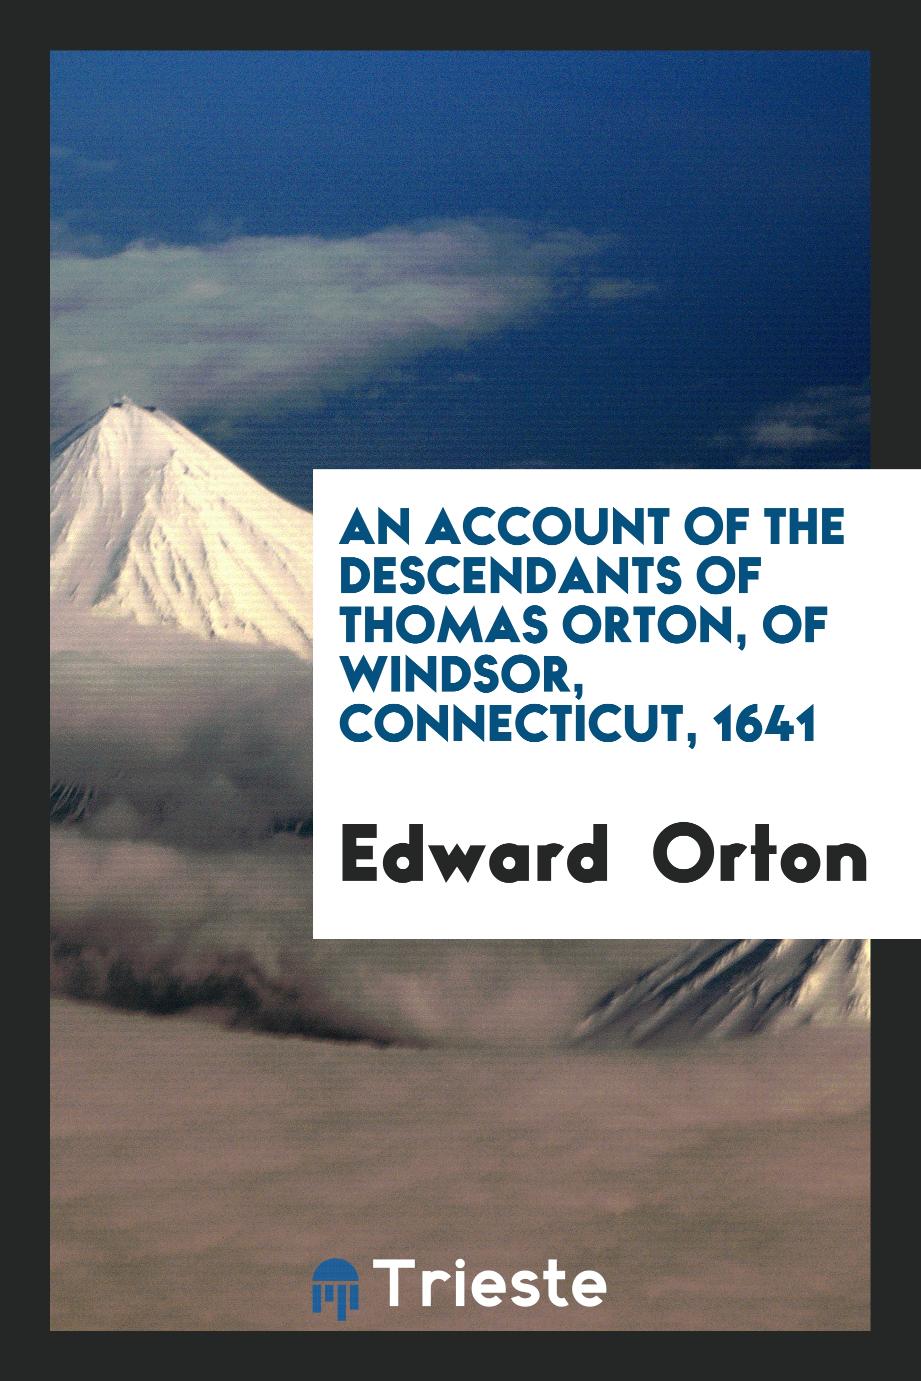 An Account of the Descendants of Thomas Orton, of Windsor, Connecticut, 1641